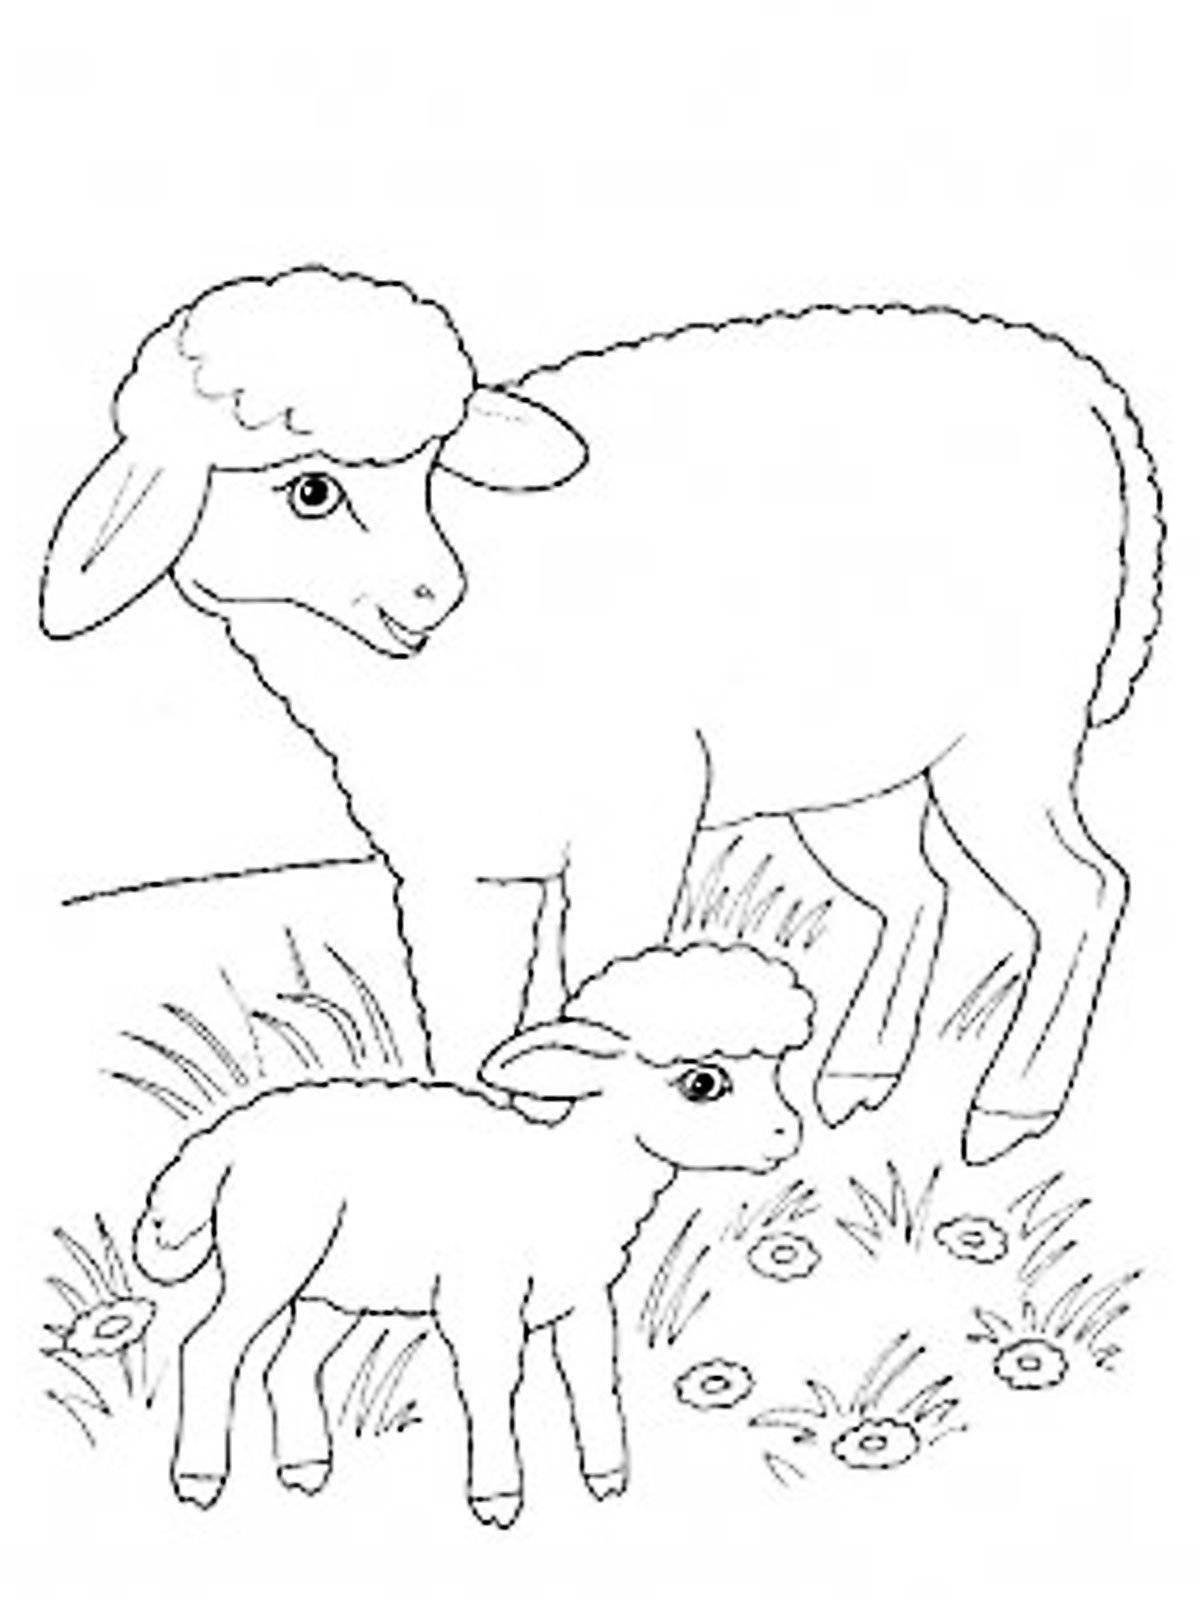 Colorful coloring pages of domestic animals and their cubes